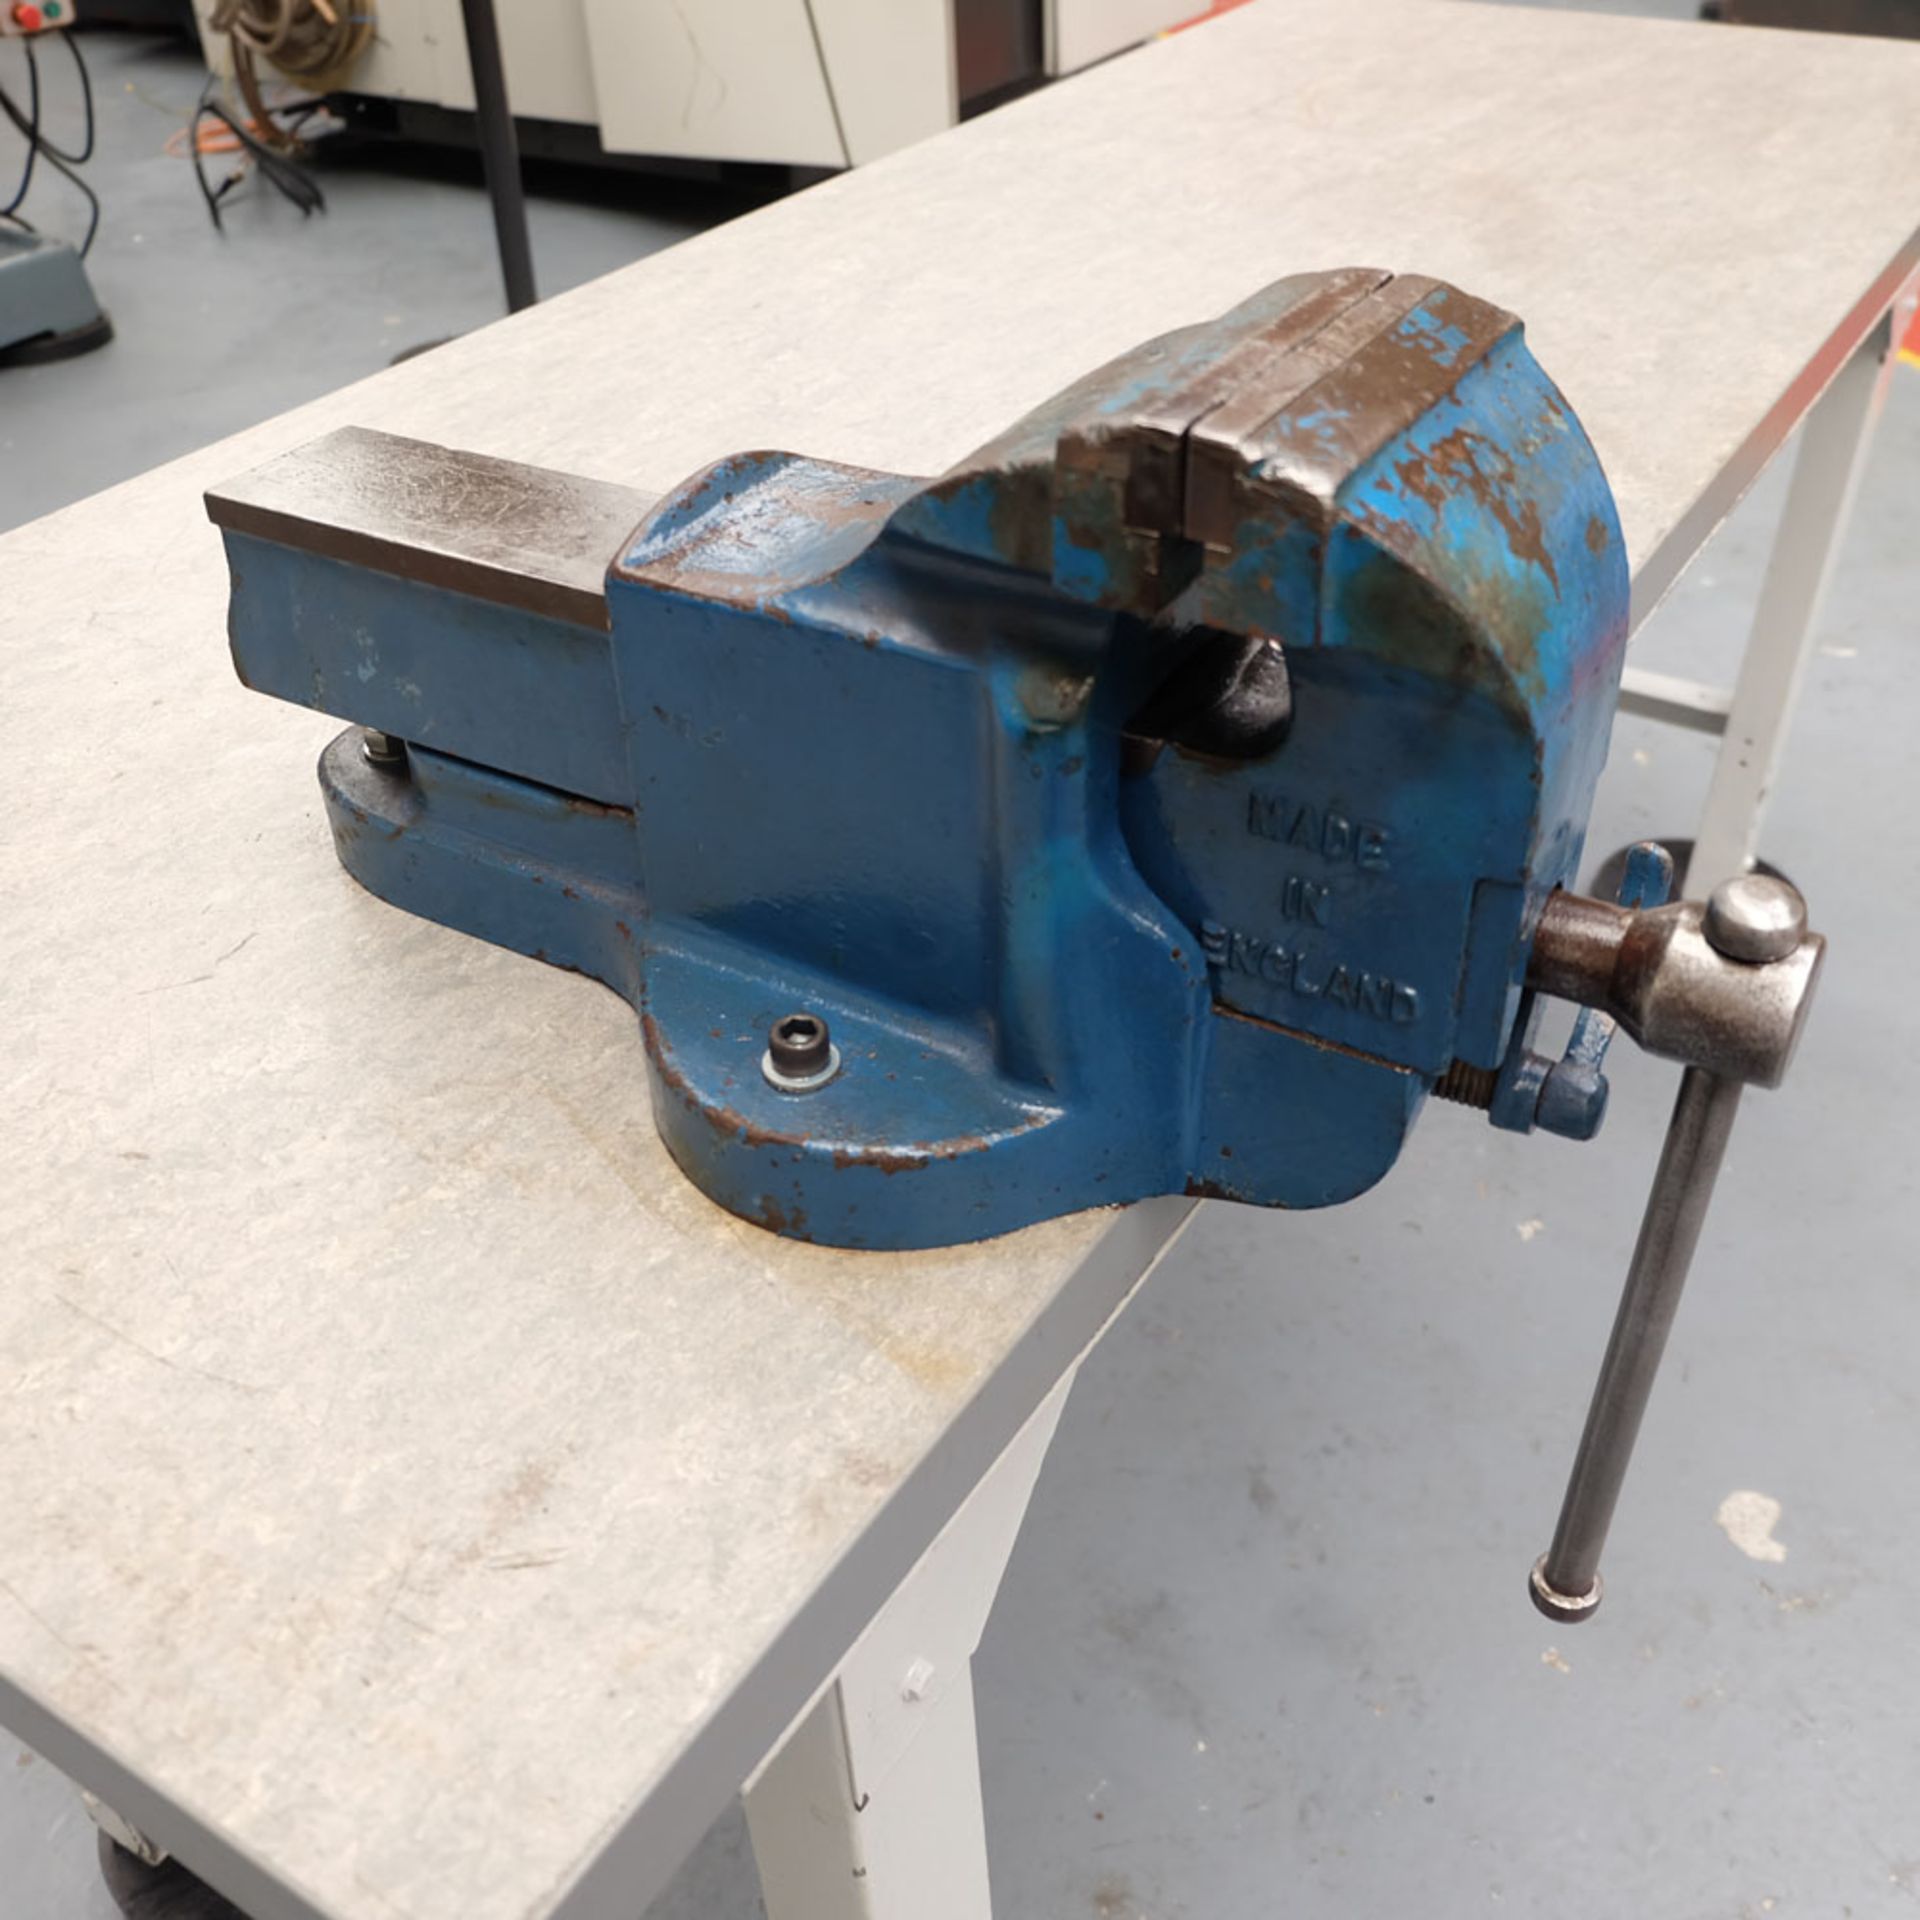 Worktop Bench With No.24 Record Bench Vice. Bench Size 2000mm x 750mm x 840mm High. - Image 4 of 4